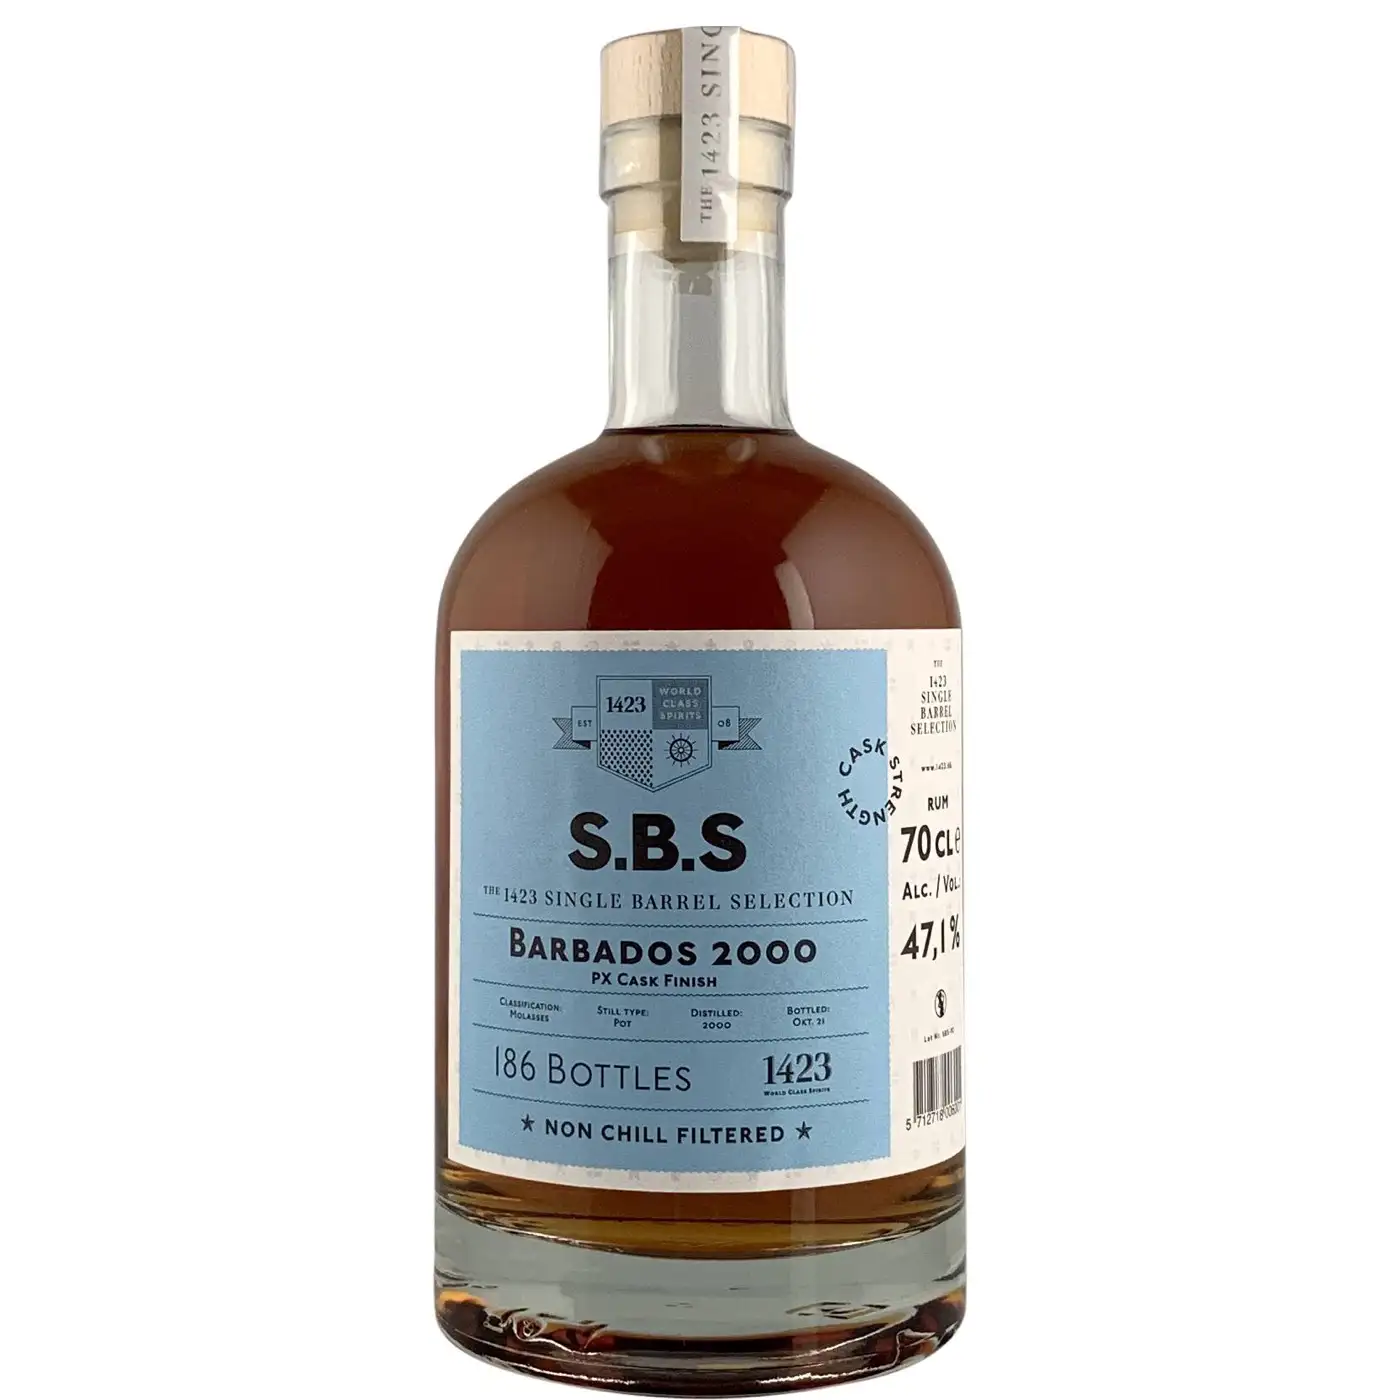 Image of the front of the bottle of the rum S.B.S Barbados PX Cask Finish